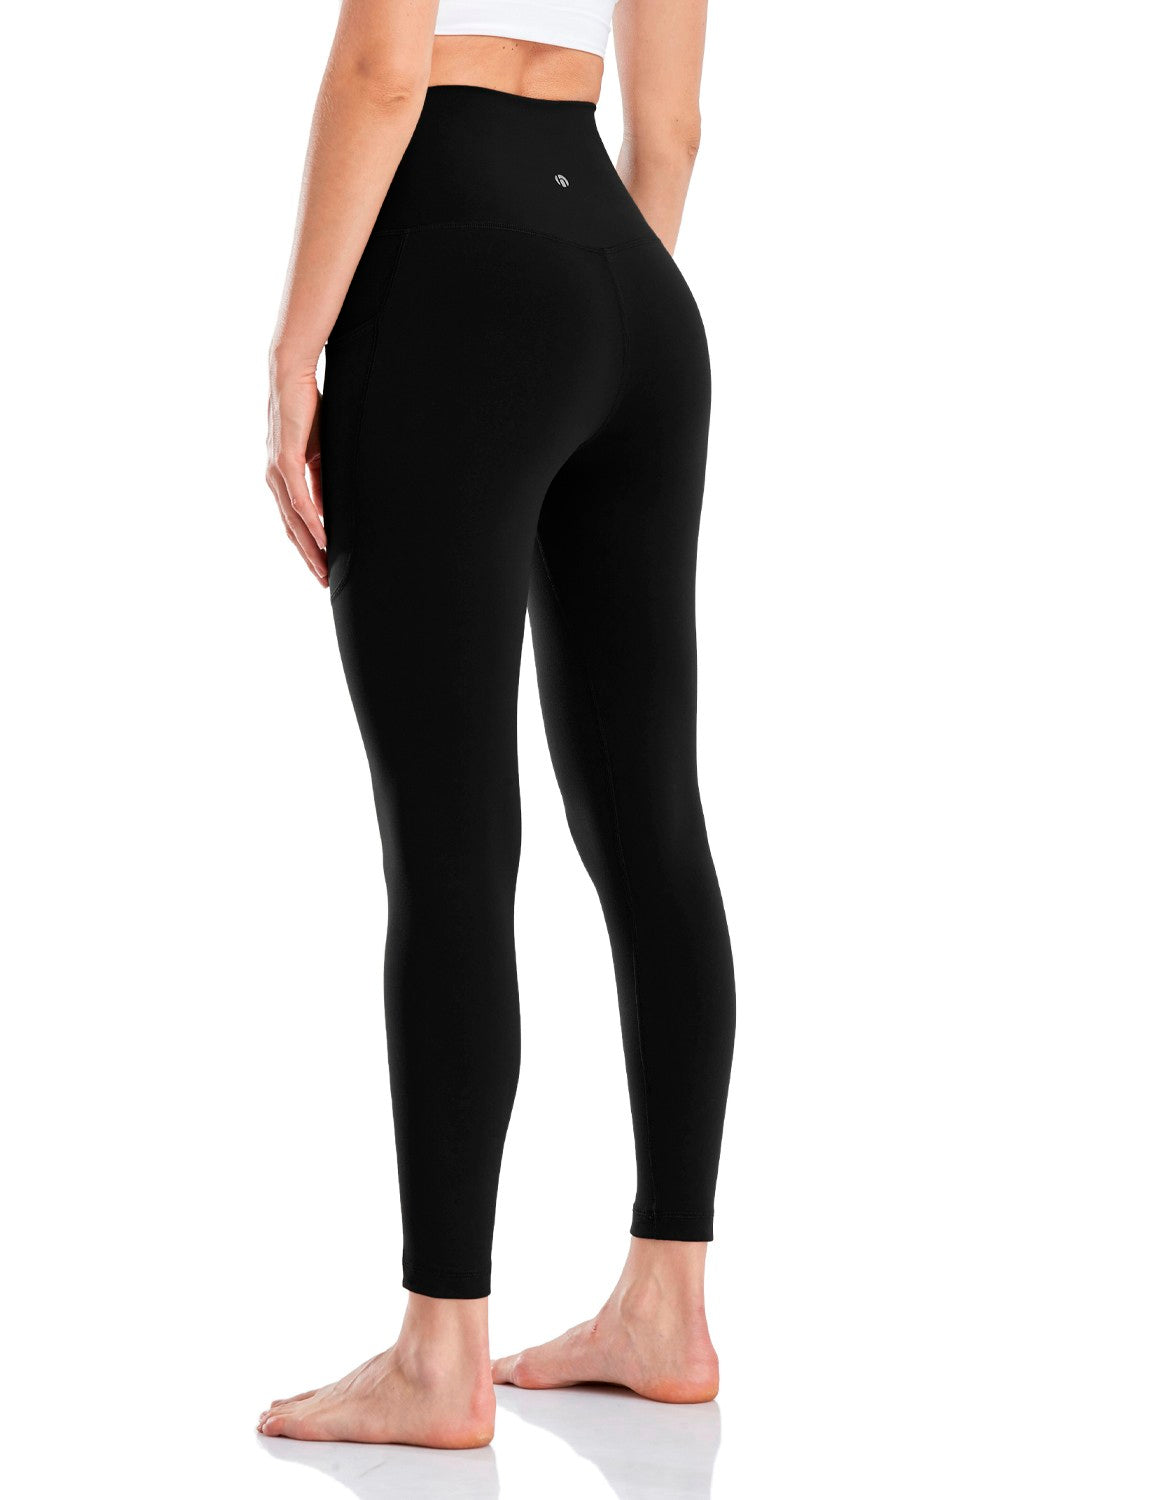 HeyNuts Essential/Workout Pro/Yoga Pro 7/8 Leggings with Pockets for Women,  High Waisted Compression Workout Yoga Pants 25